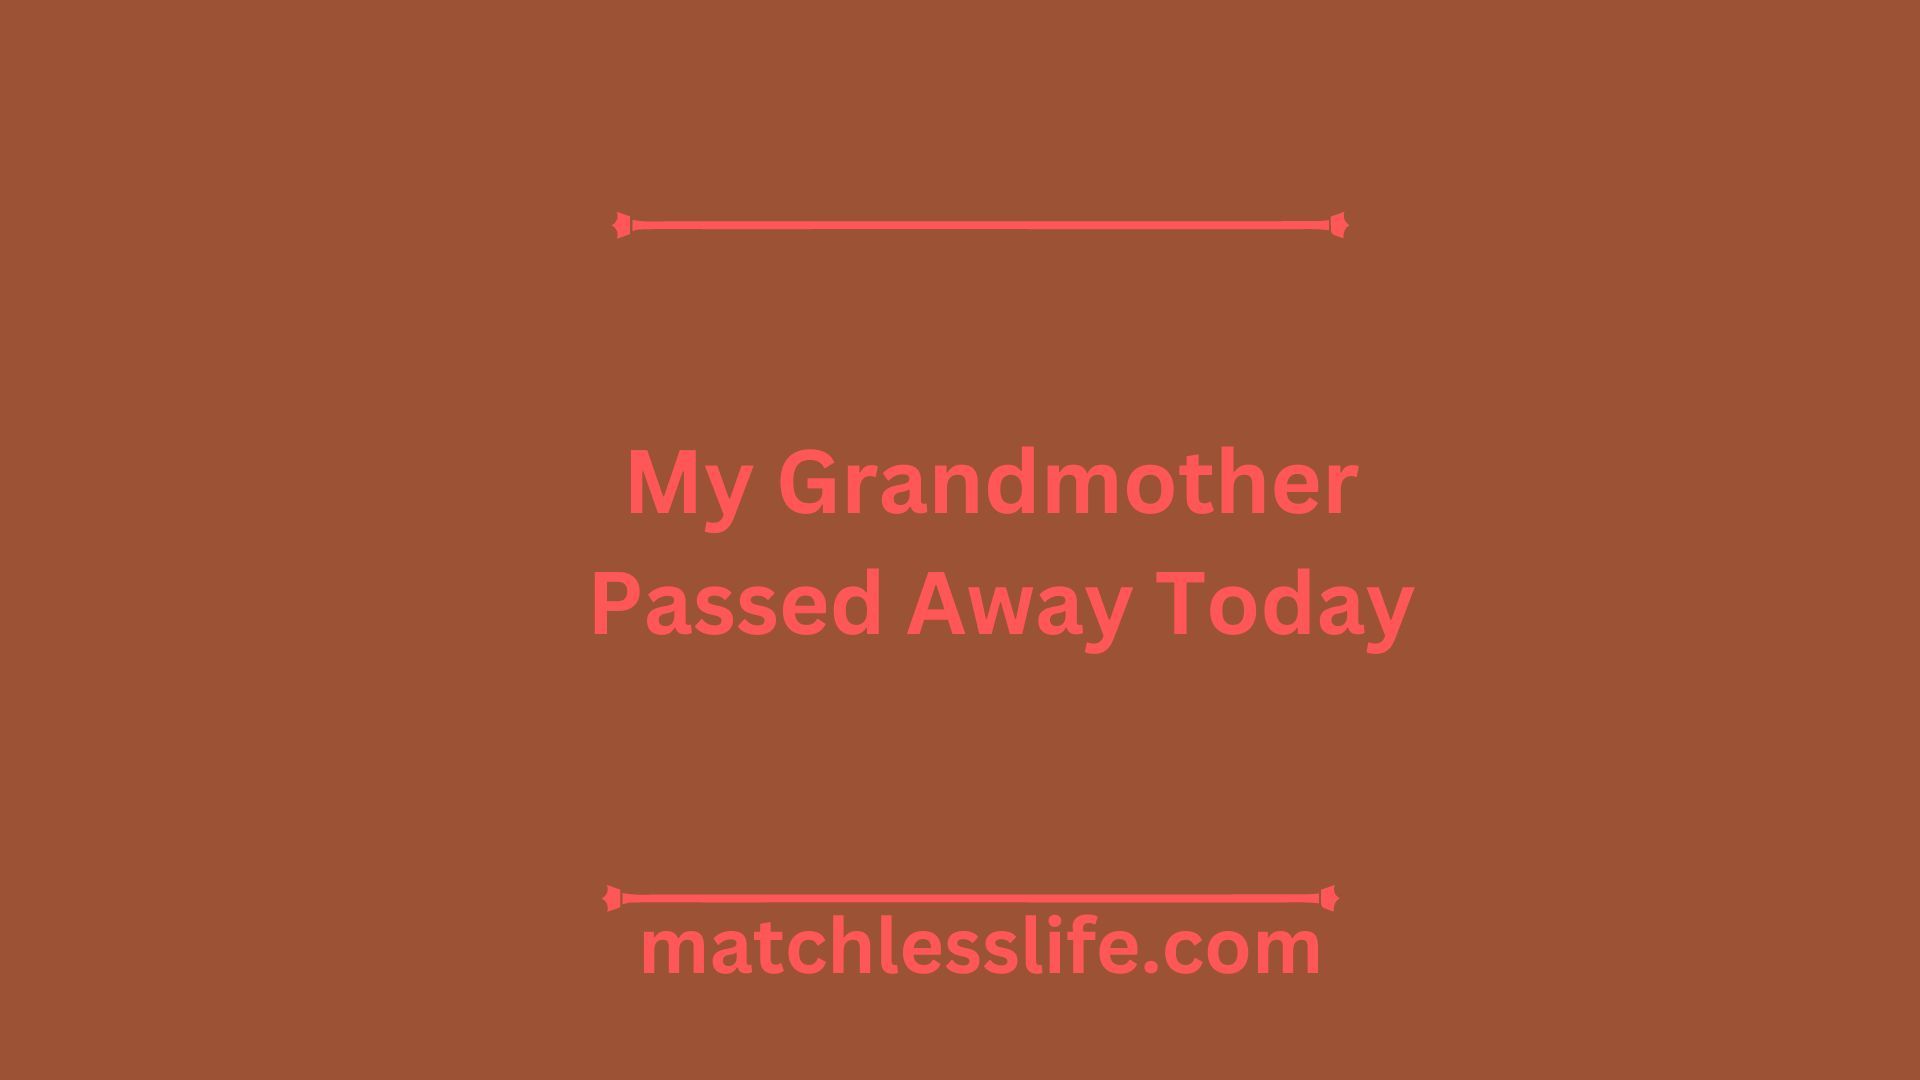 My Grandmother Passed Away Today